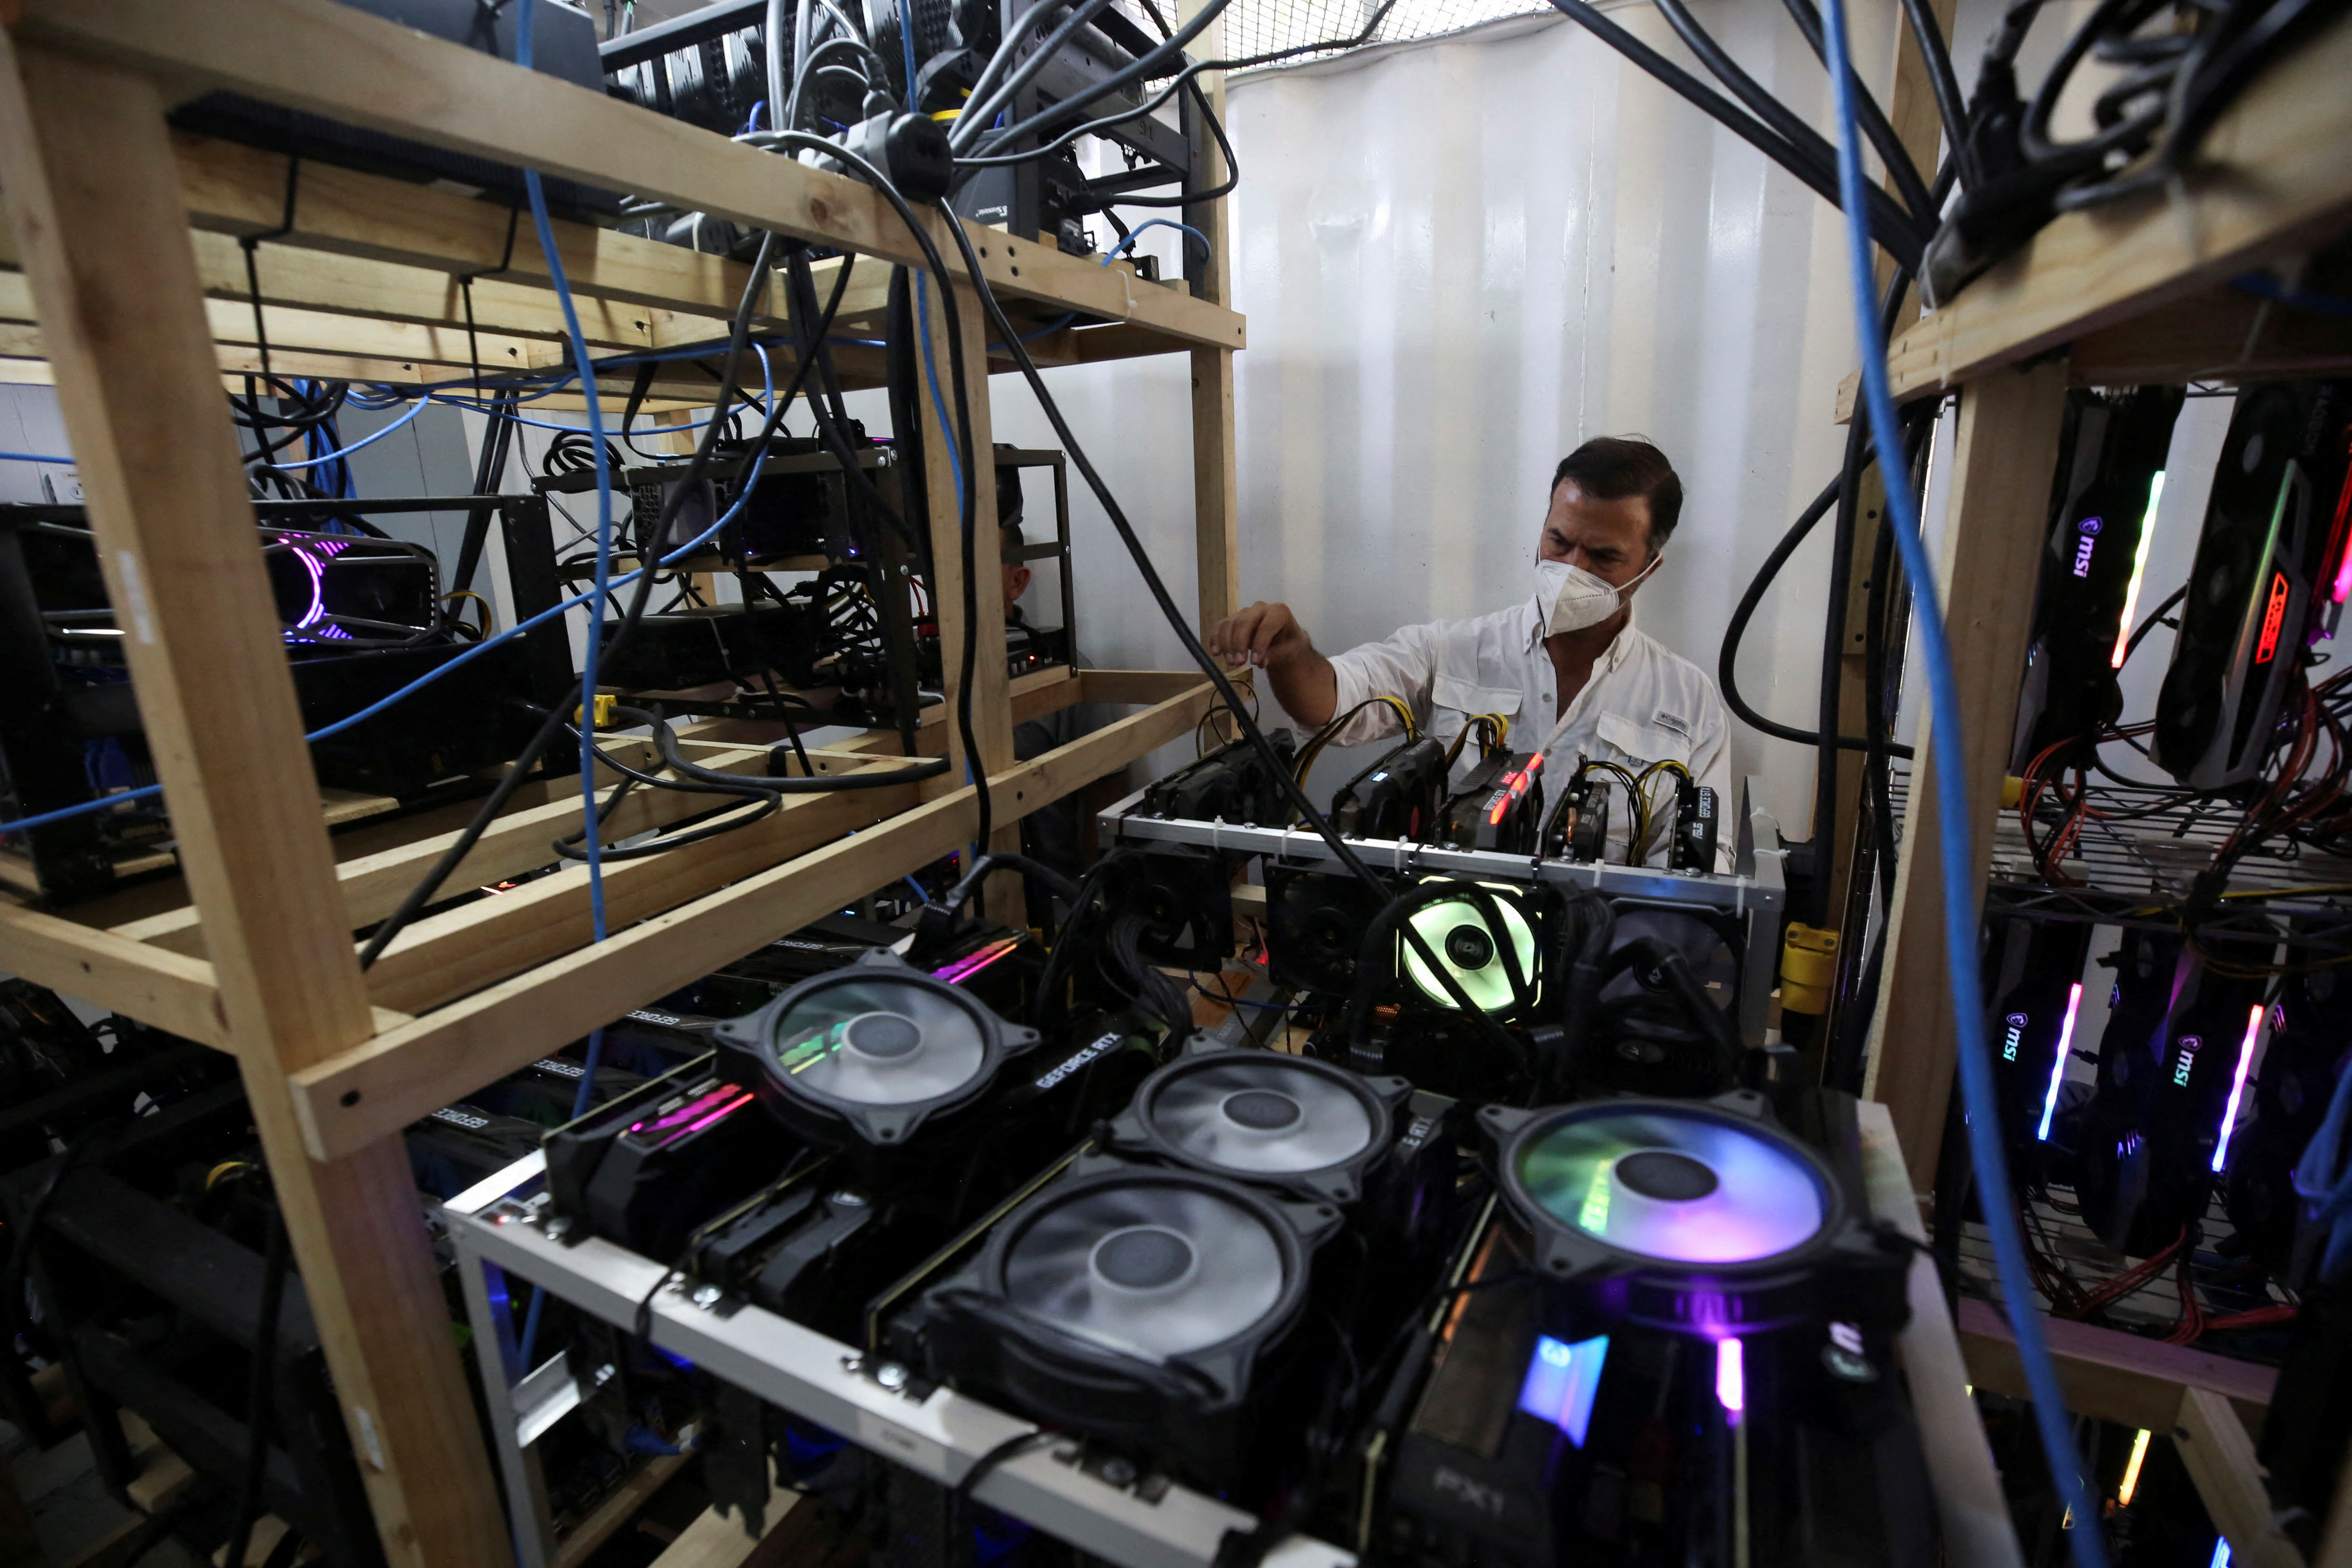 Eduardo Kopper, owner of Data Center CR, works in the data center at the Poas I hydroelectric plant that provides the energy to the computers, in Alajuela, Costa Rica January 8, 2022. Picture taken January 8, 2022. REUTERS/Mayela Lopez